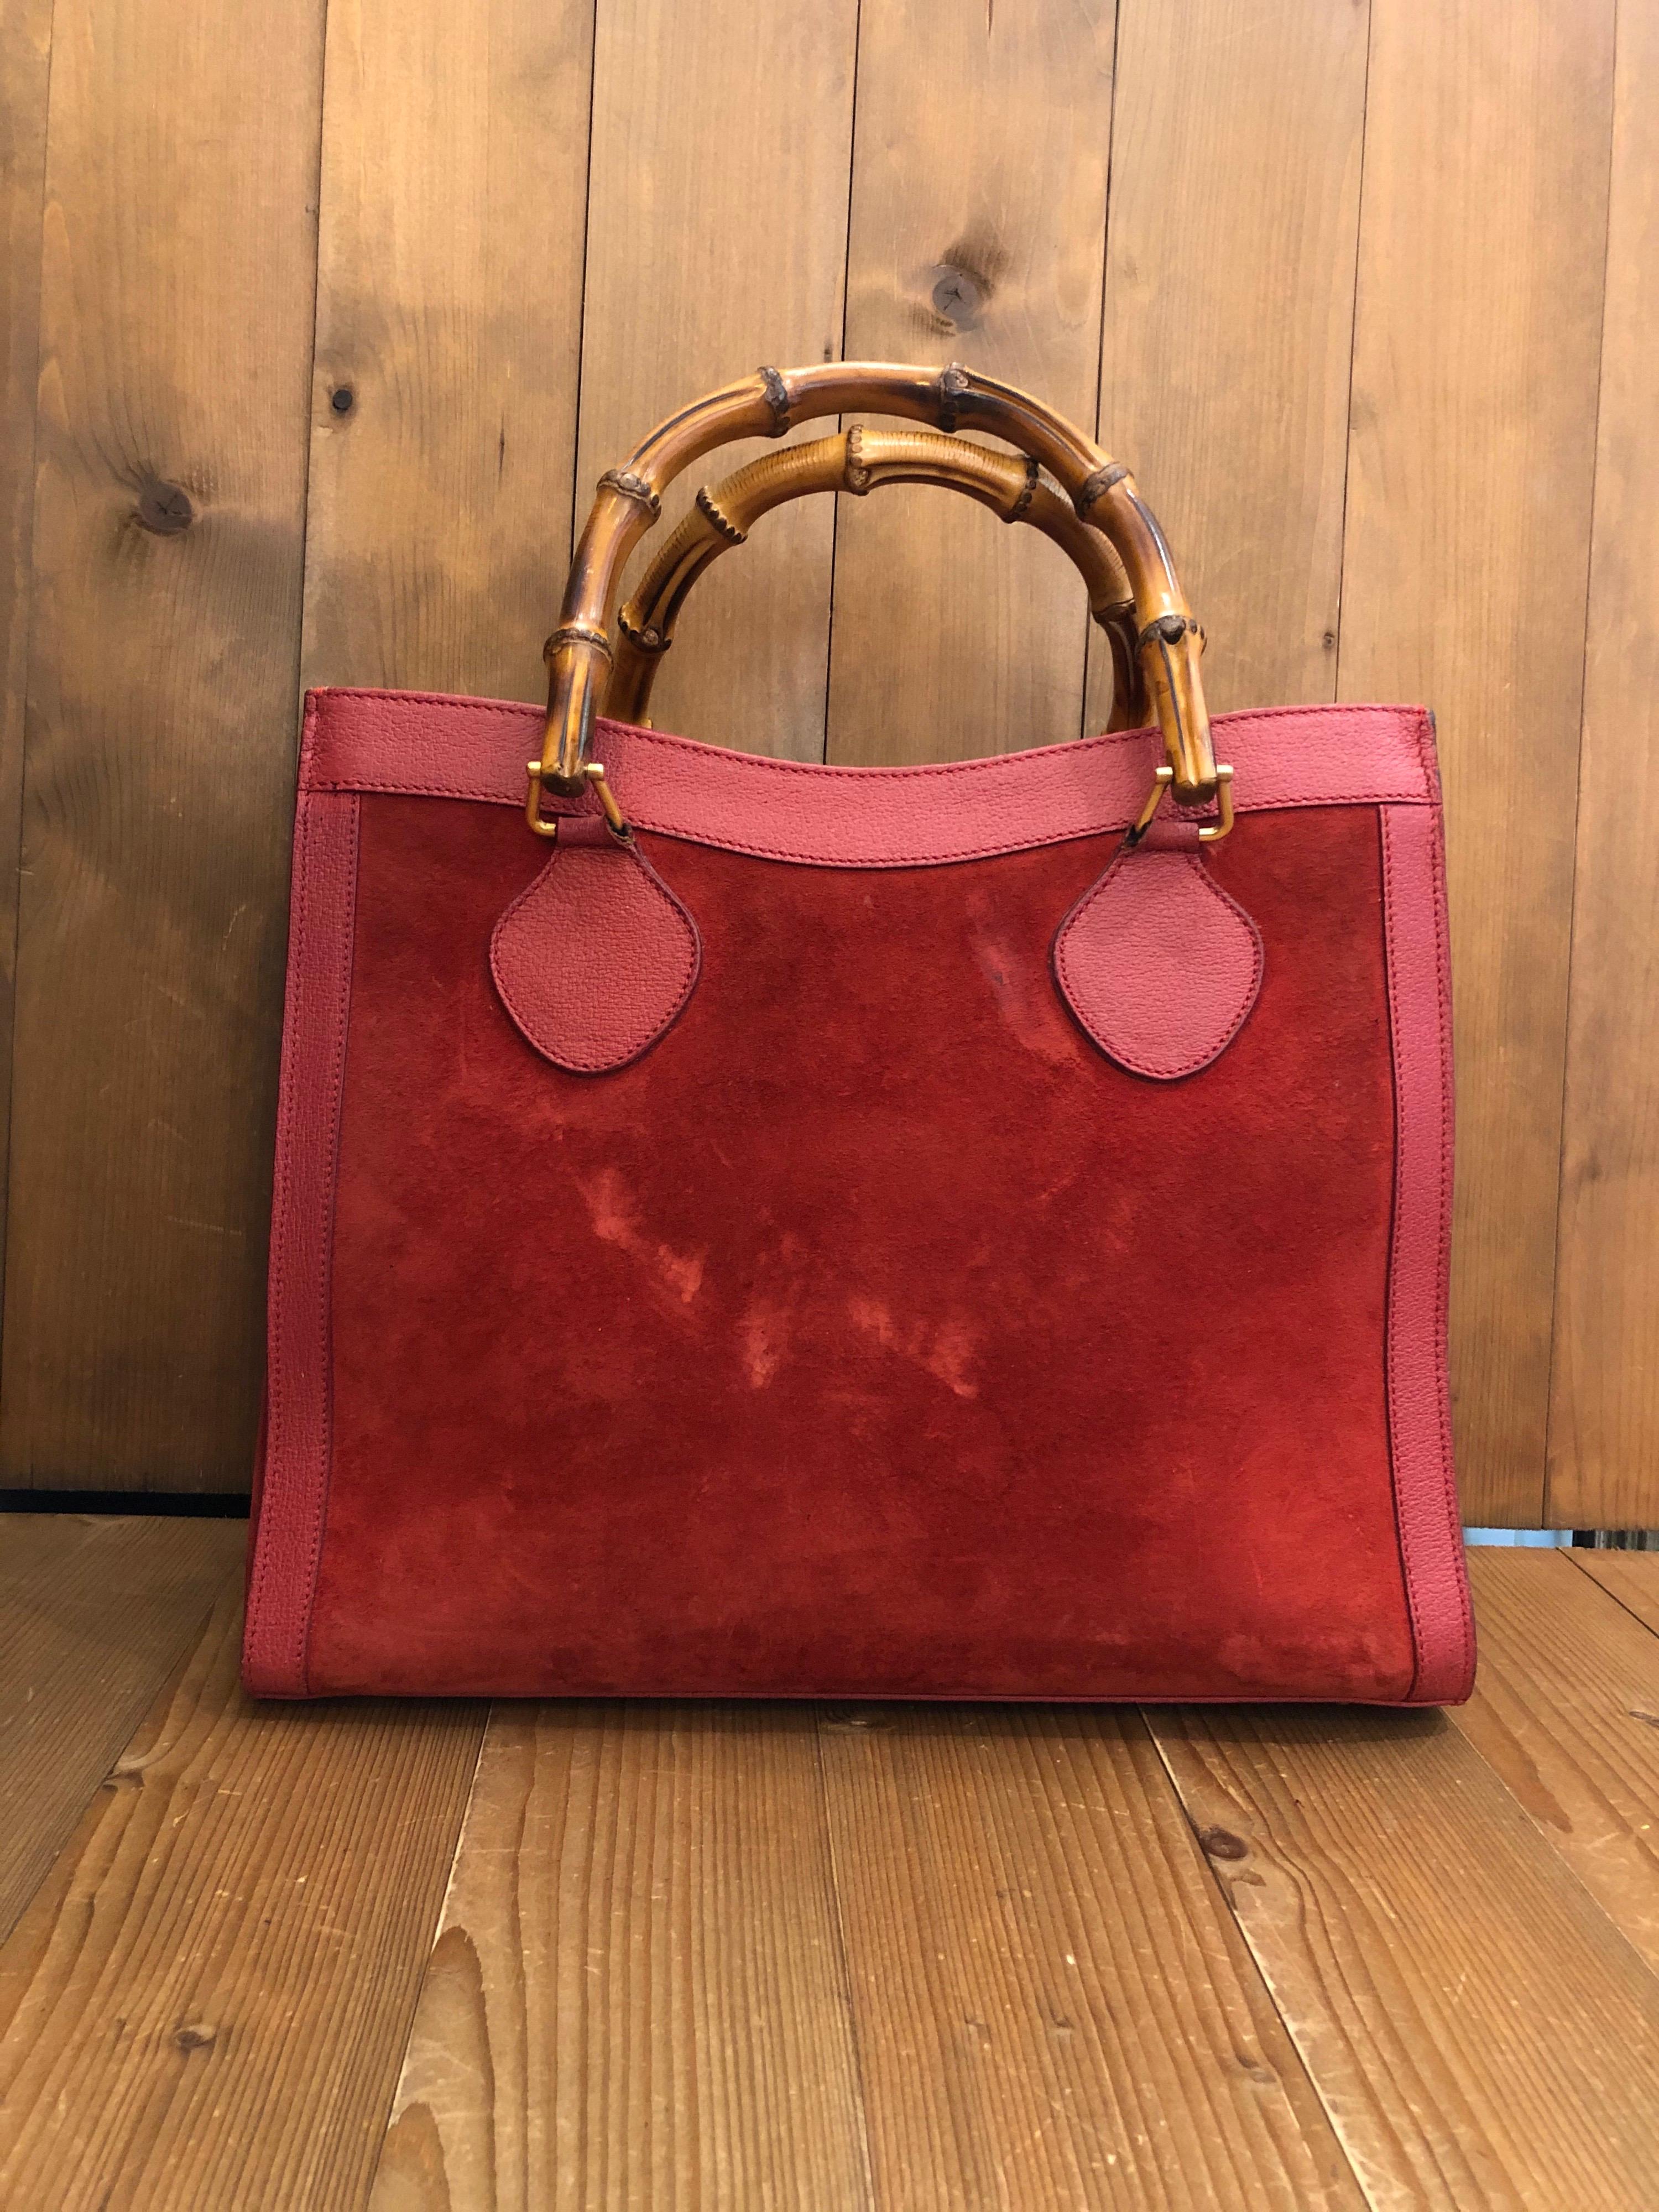 This vintage GUCCI Diana bamboo tote is crafted of pigskin’s leather and suede in burgundy and matt gold toned hardware. Top magnetic snap closure opens to a new interior in burgundy. It features two main compartments/one zip compartment and one